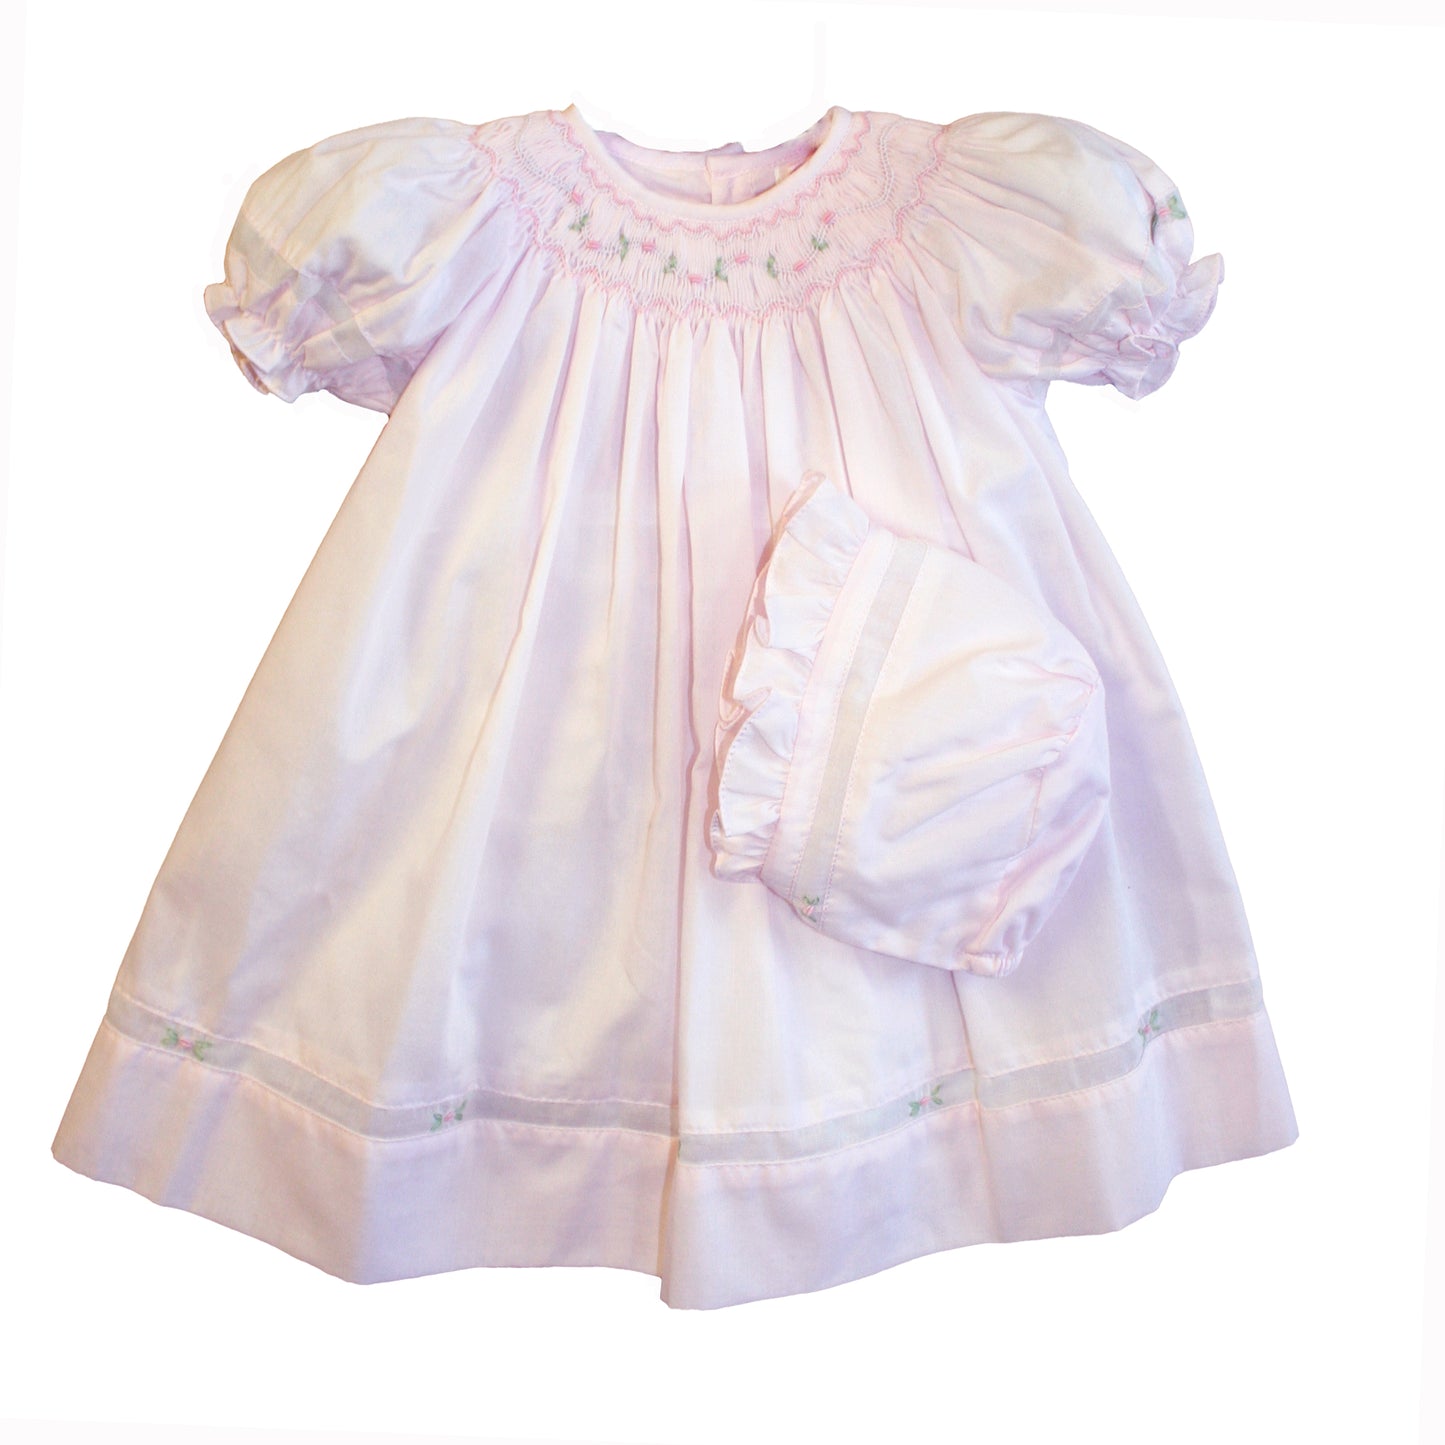 Preemie  Day Gown with Bonnet